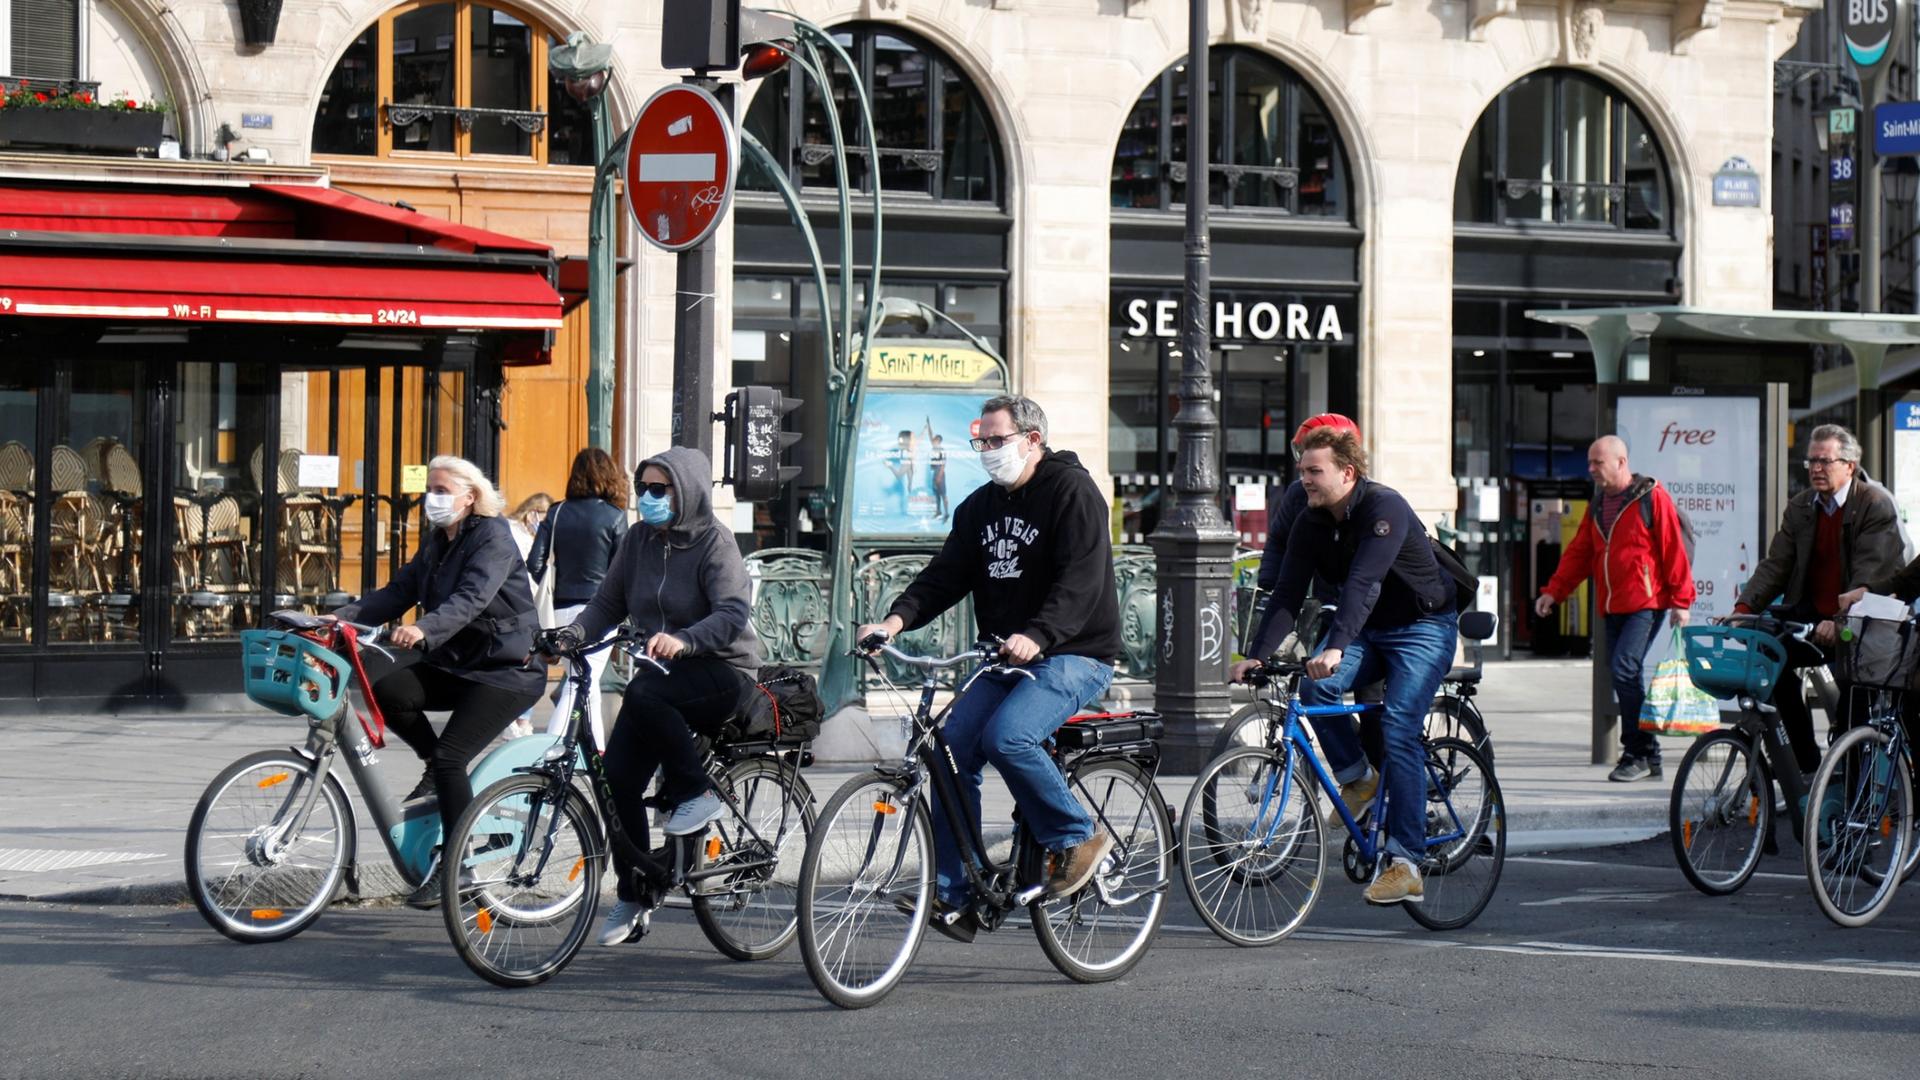 A group of several people are shown riding bicycles in the streets and wearing protective face masks.